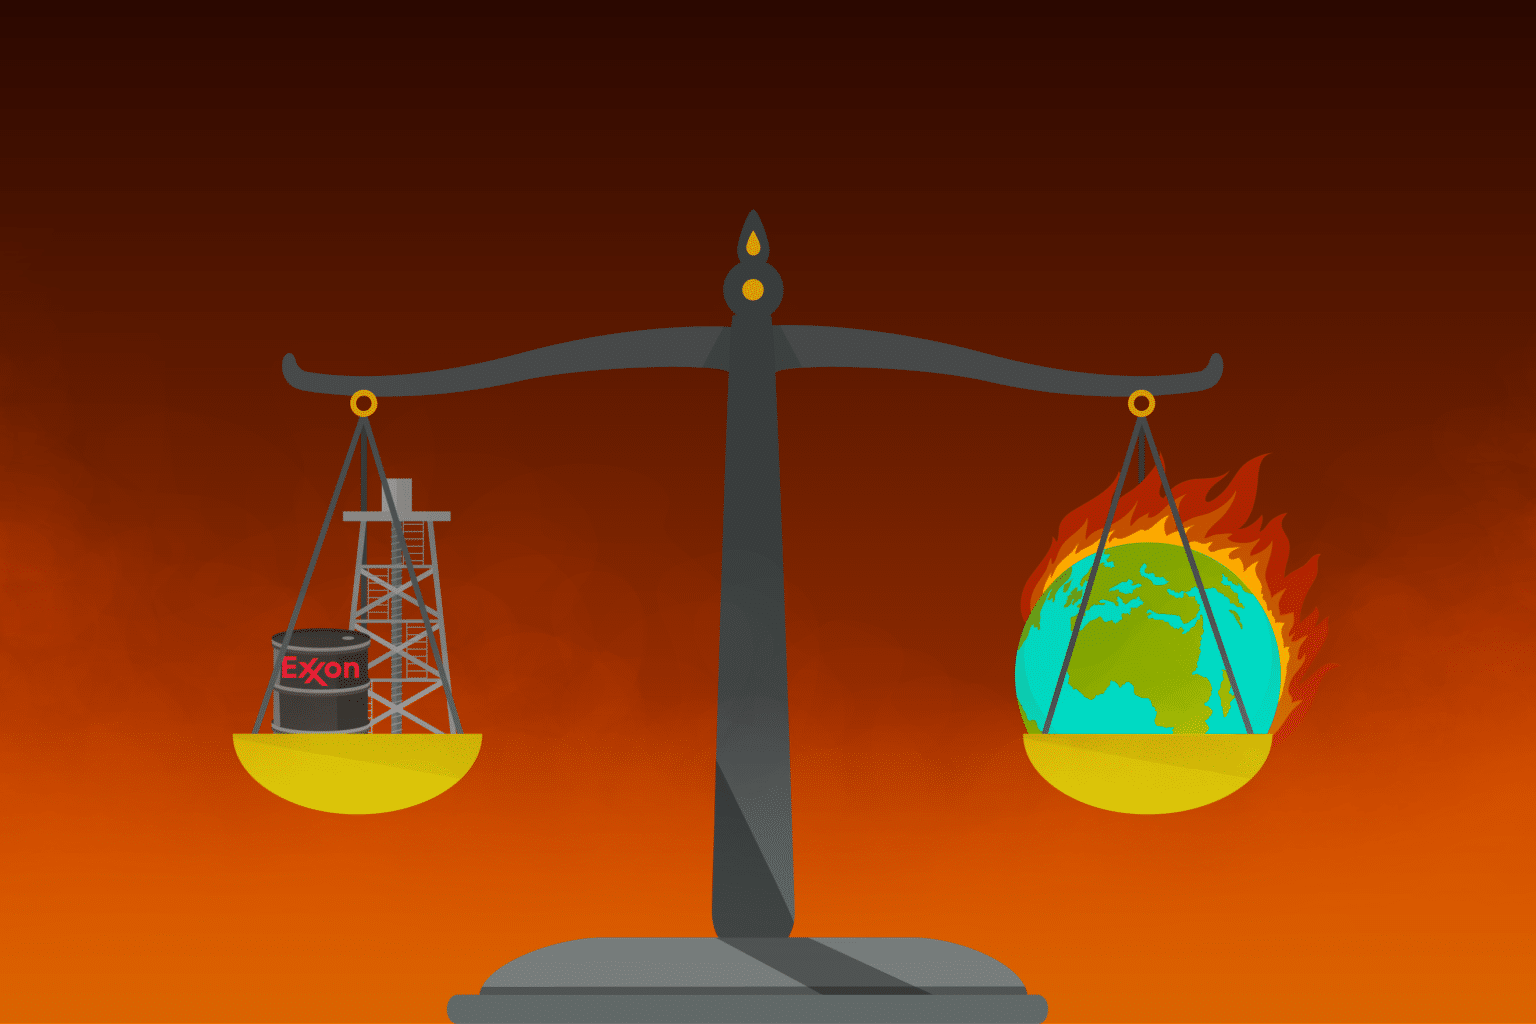 Illustration of the scales of justice with a burning planet on the right and oil derrick and drum on the left.